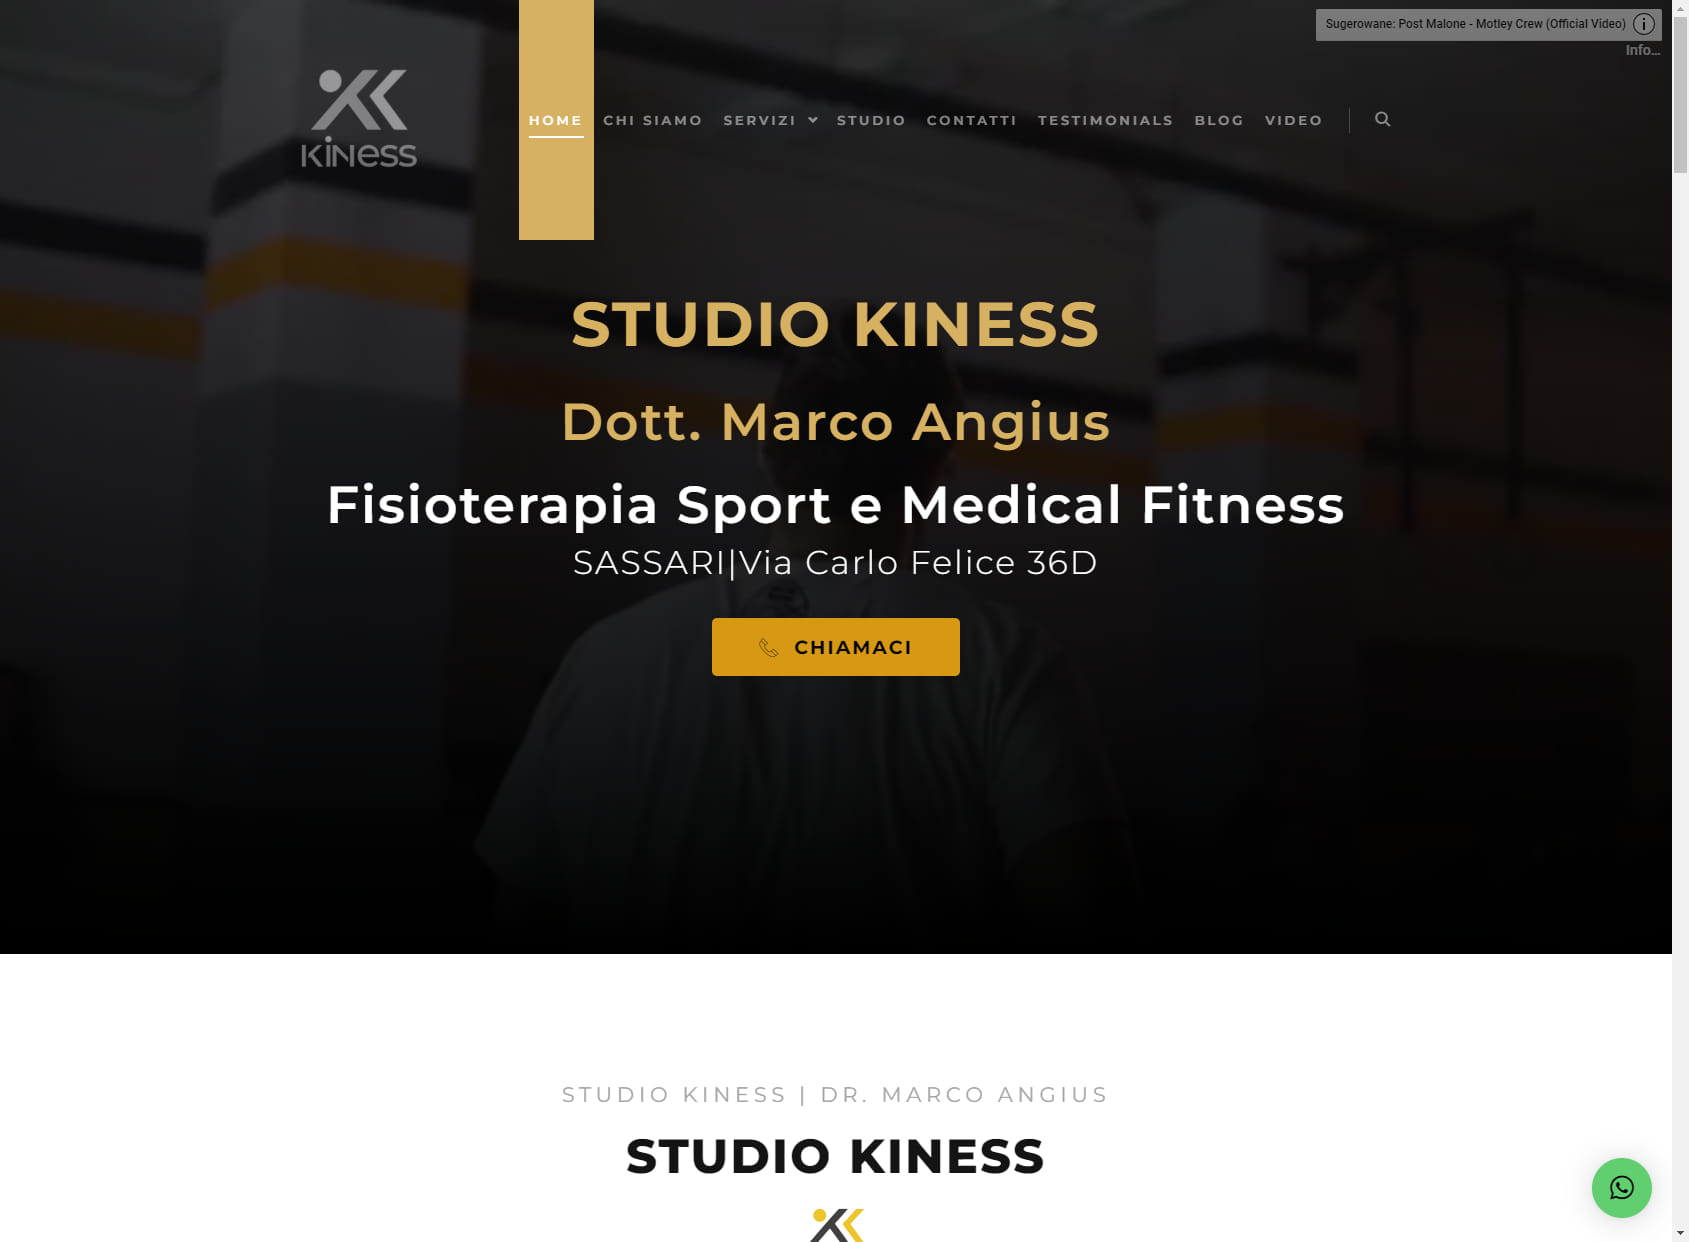 Kiness Dr. Marco Angius